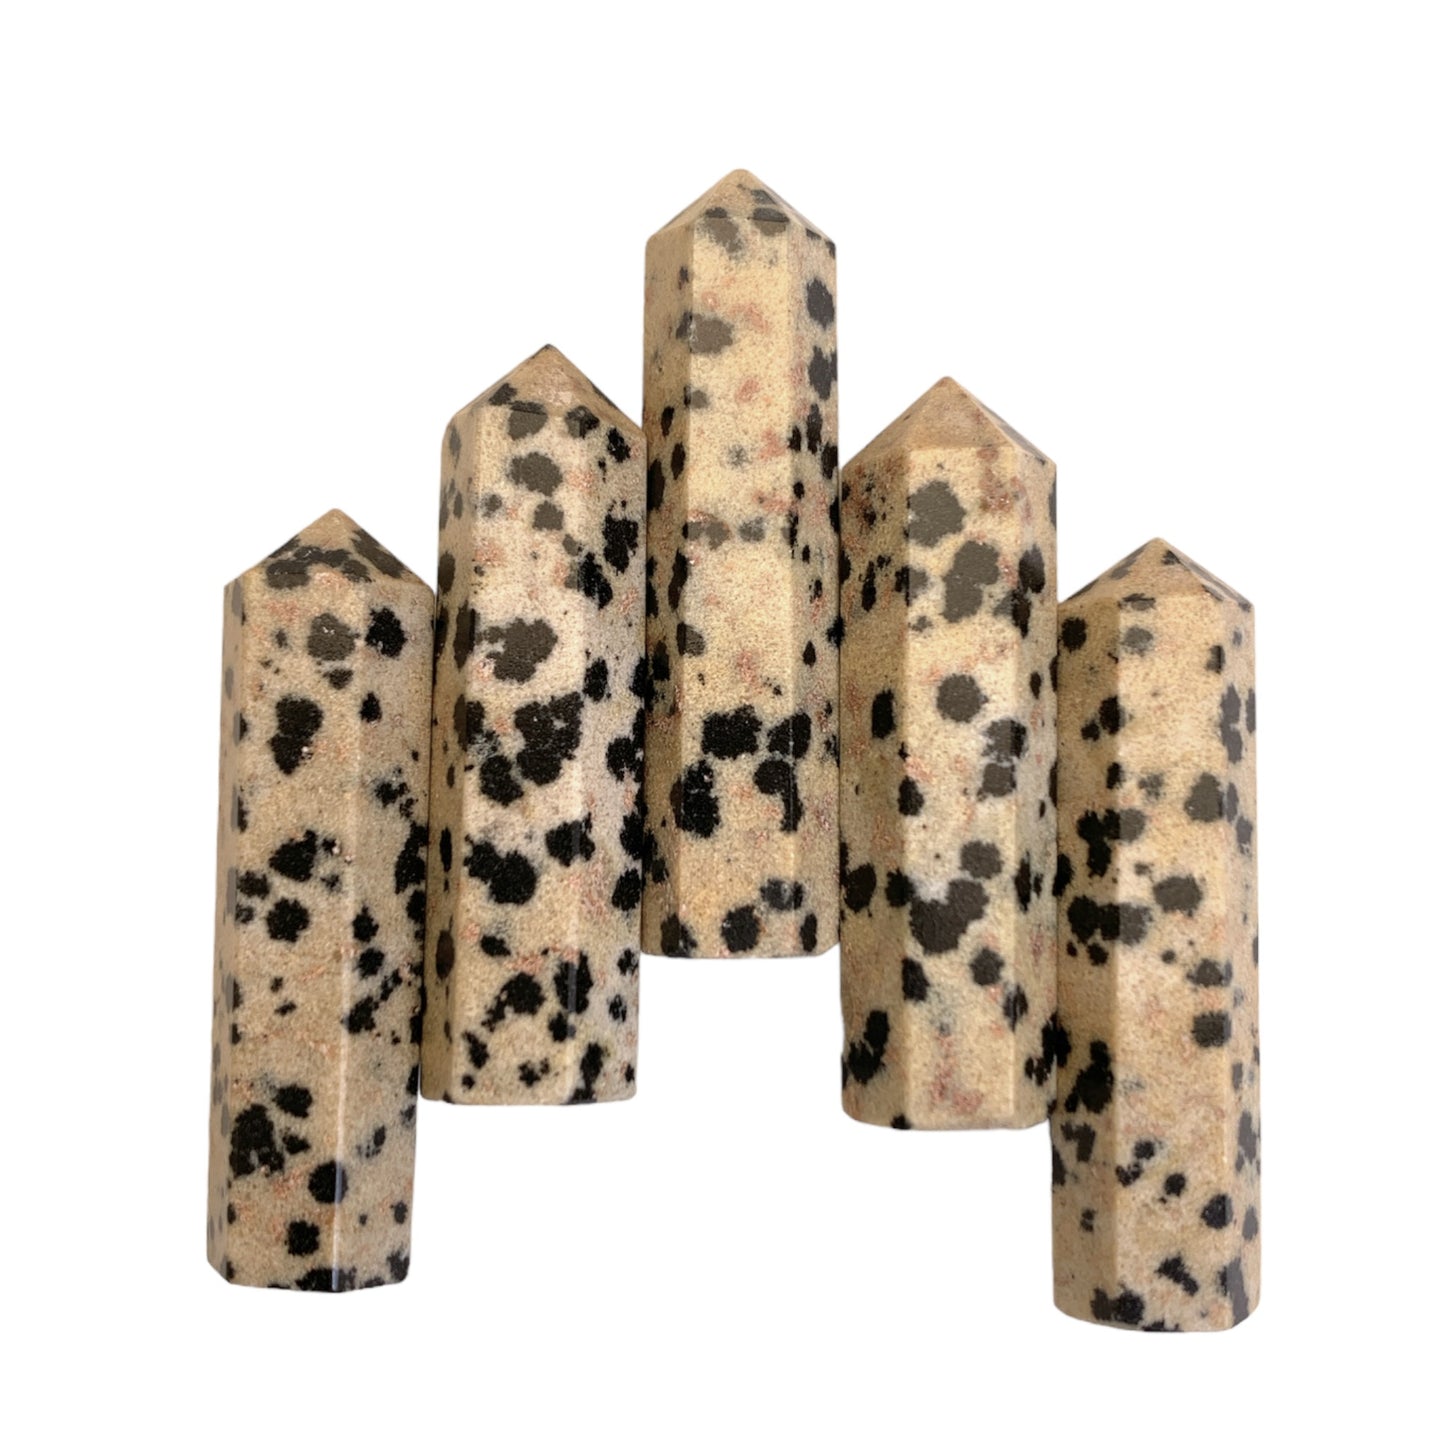 Dalmatian Jasper - 30-35mm - Single Terminated Pencil Points - (retail purchase as singles, wholesale min order 5) - NEW1221 -India